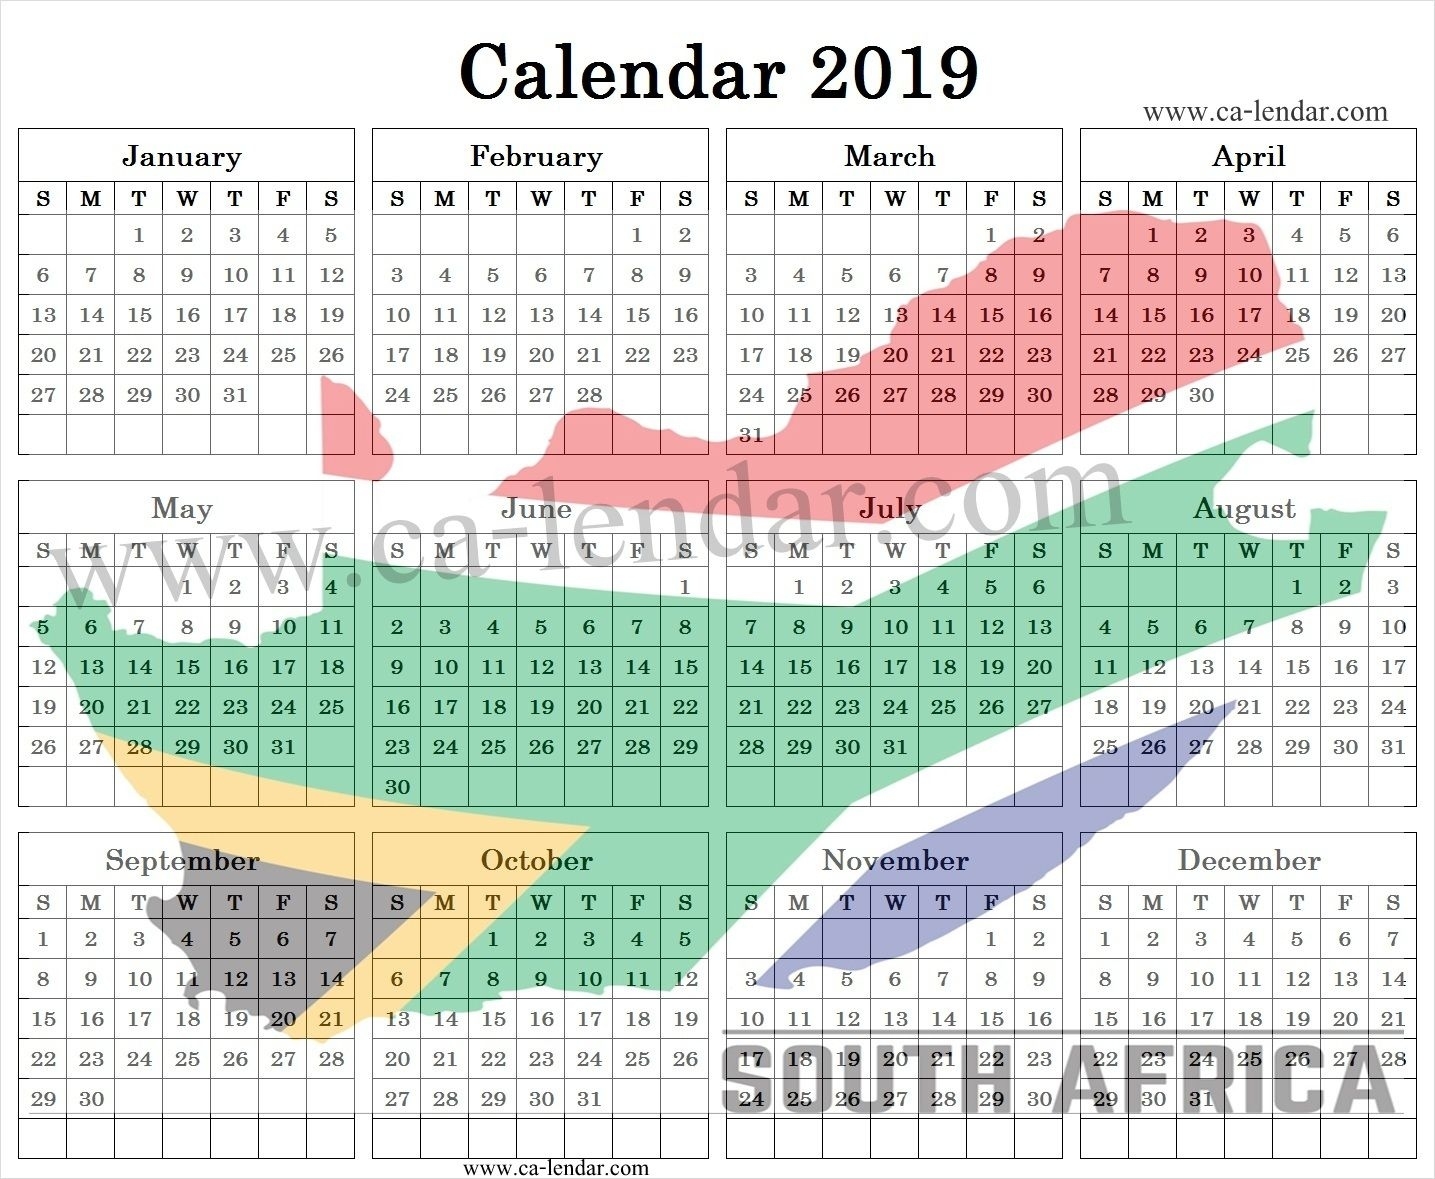 2019 South African Calendar With School Holidays | School School Calendar 2020 South Africa